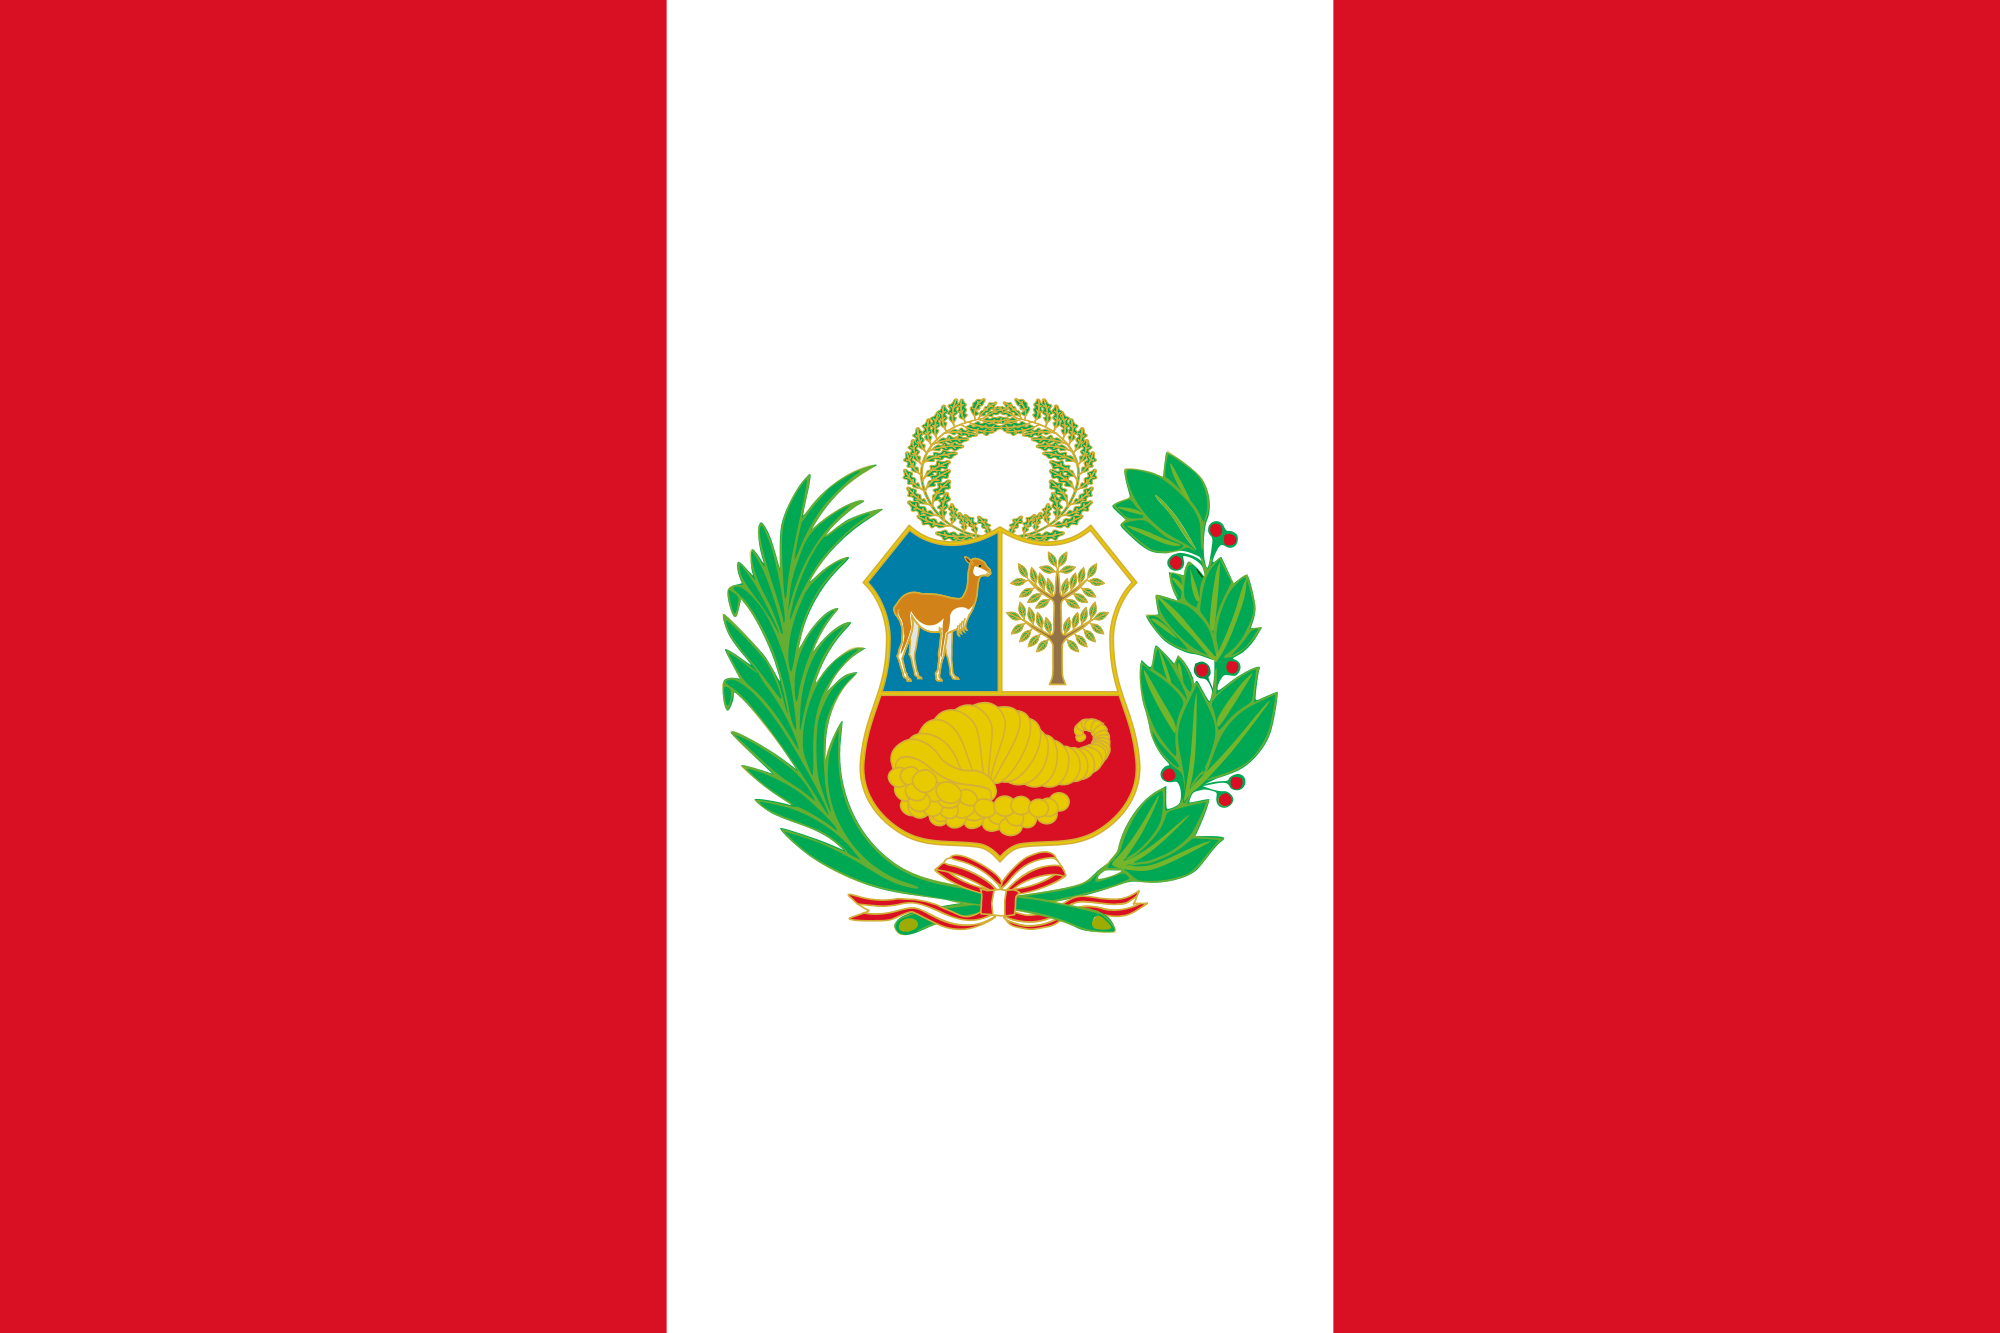 Slanted Square in White Red Cross Logo - Flag of Peru